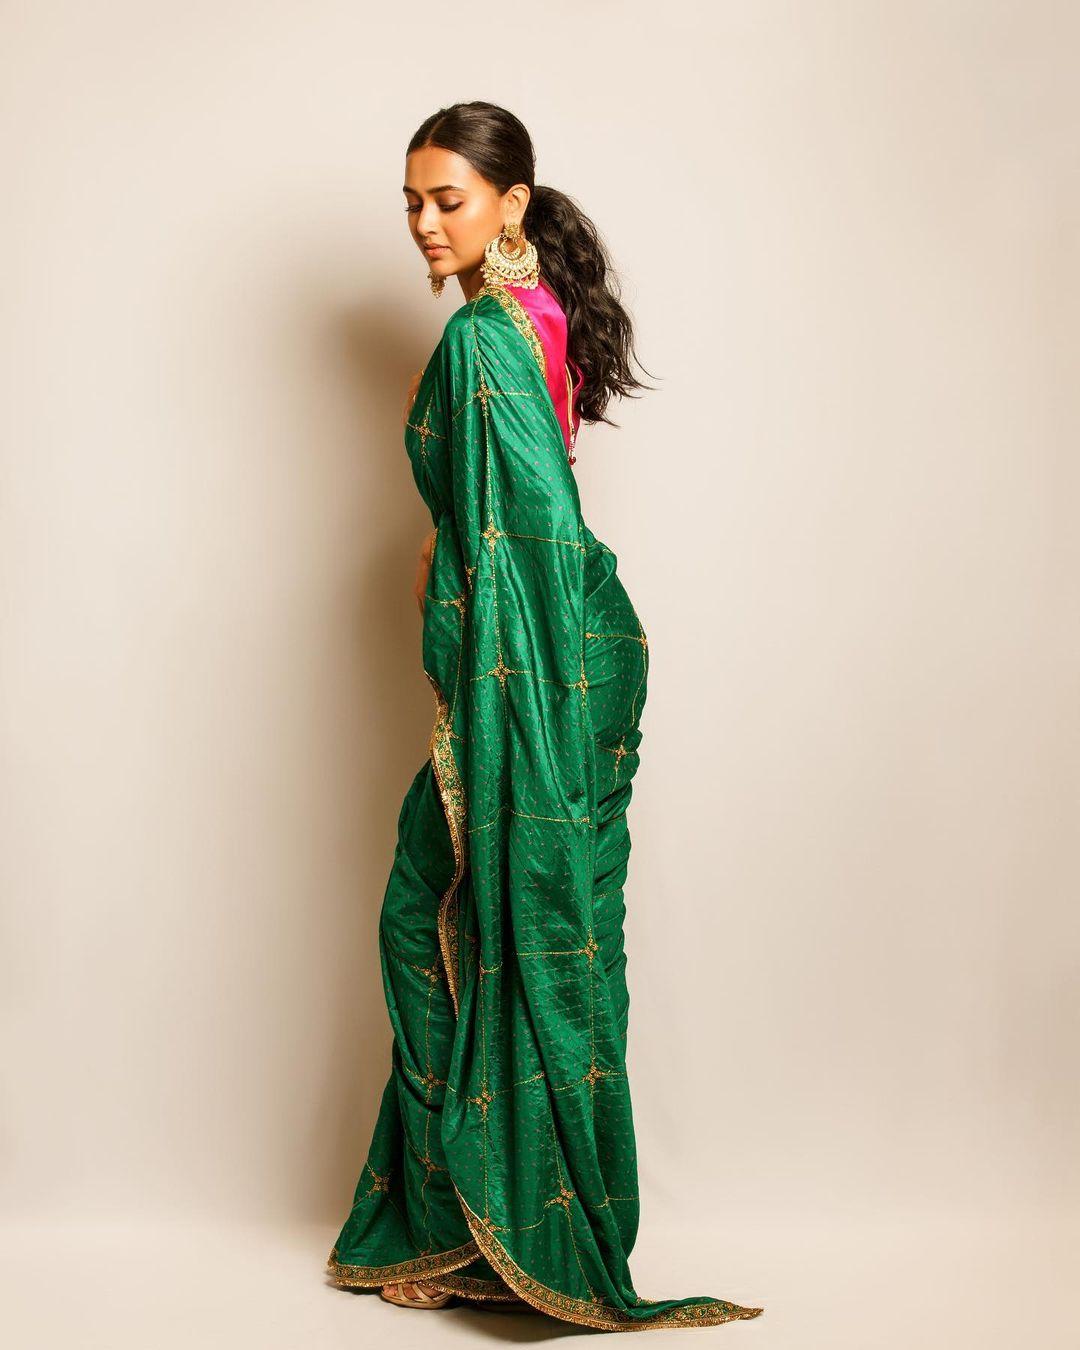 Starting with this look, which is a perfect hit as the actress draped a simple green saree with golden embroidery and paired it with a congratulatory pink blouse